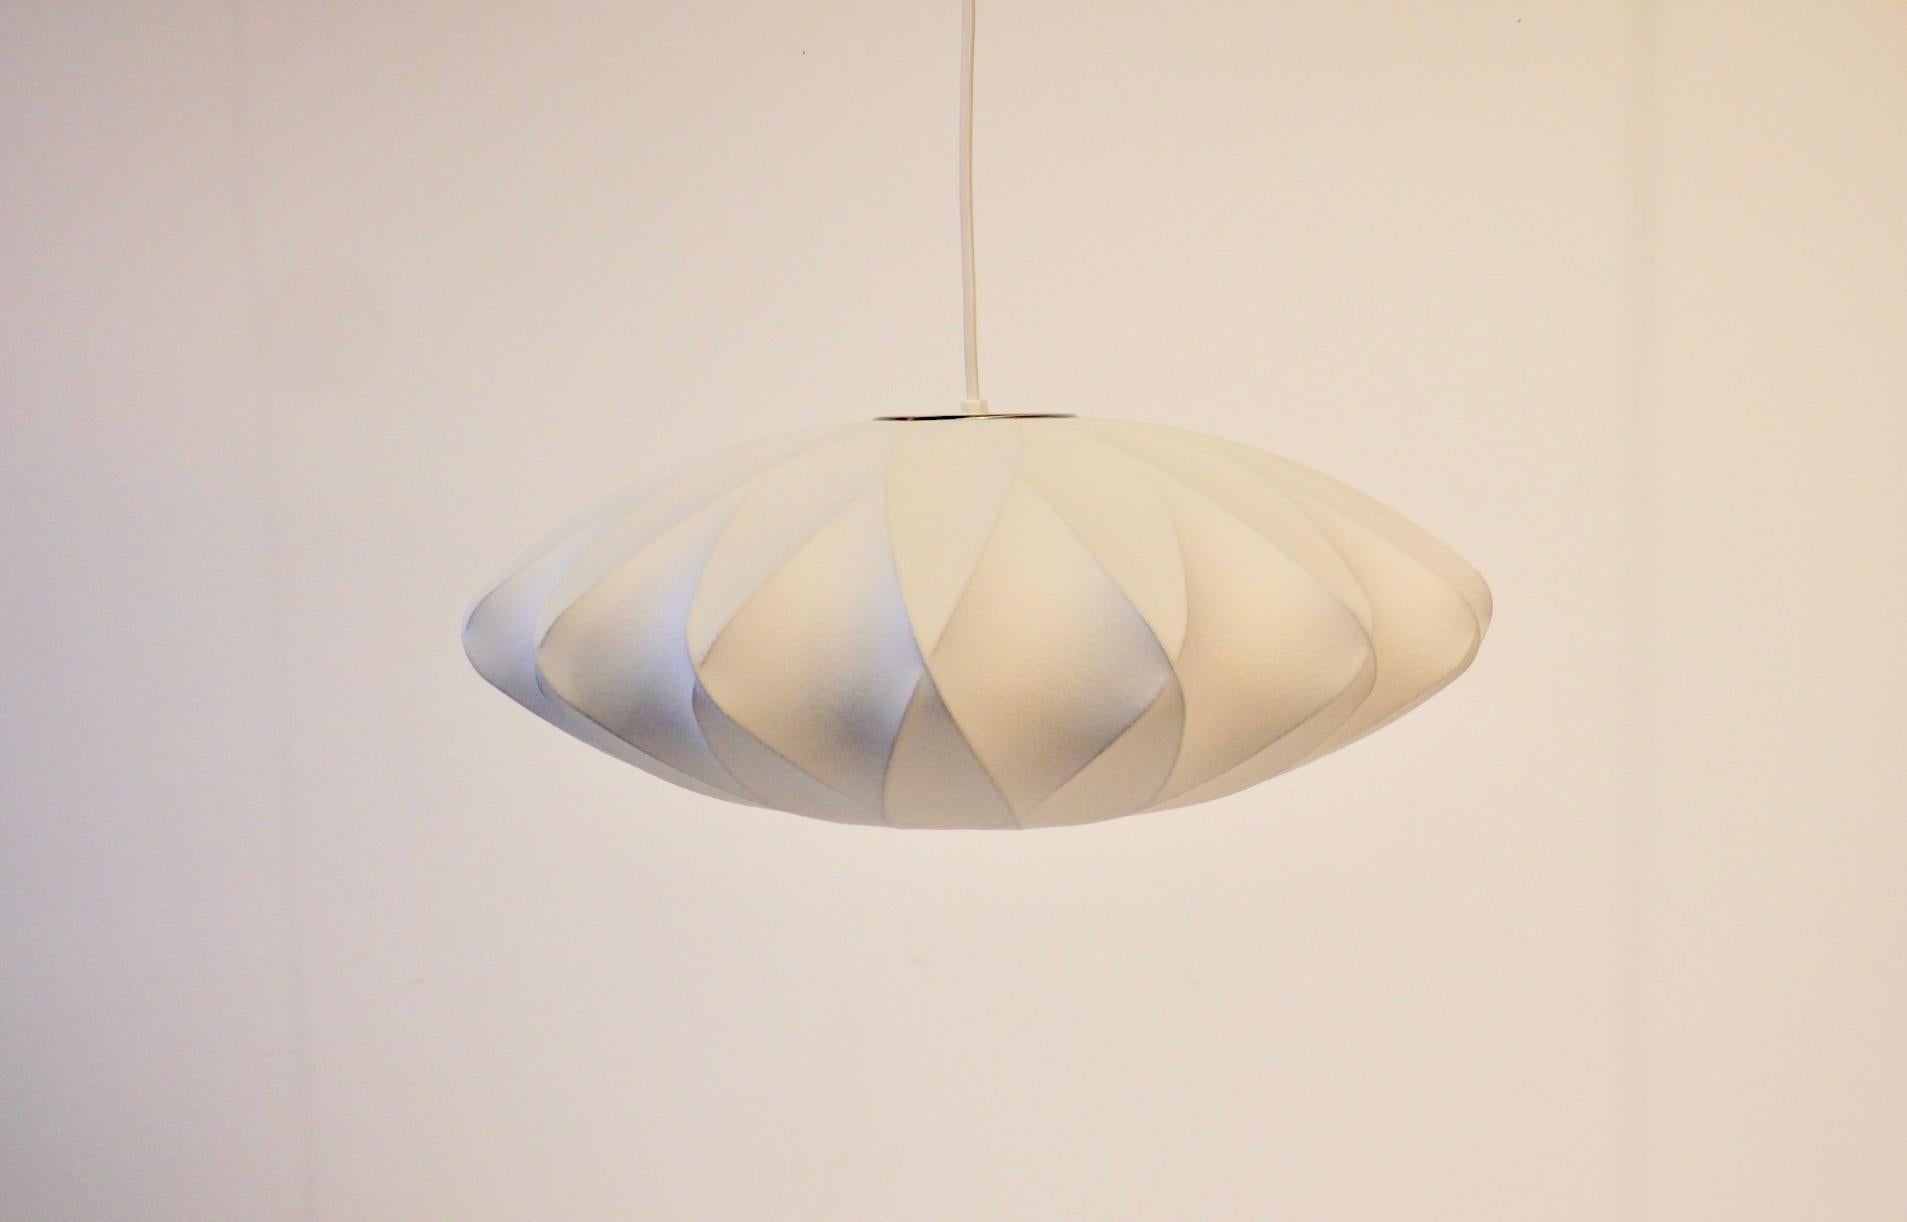 George Nelson criss cross flying saucer hanging bubble lamp. Distributed by Herman Miller. As new condition